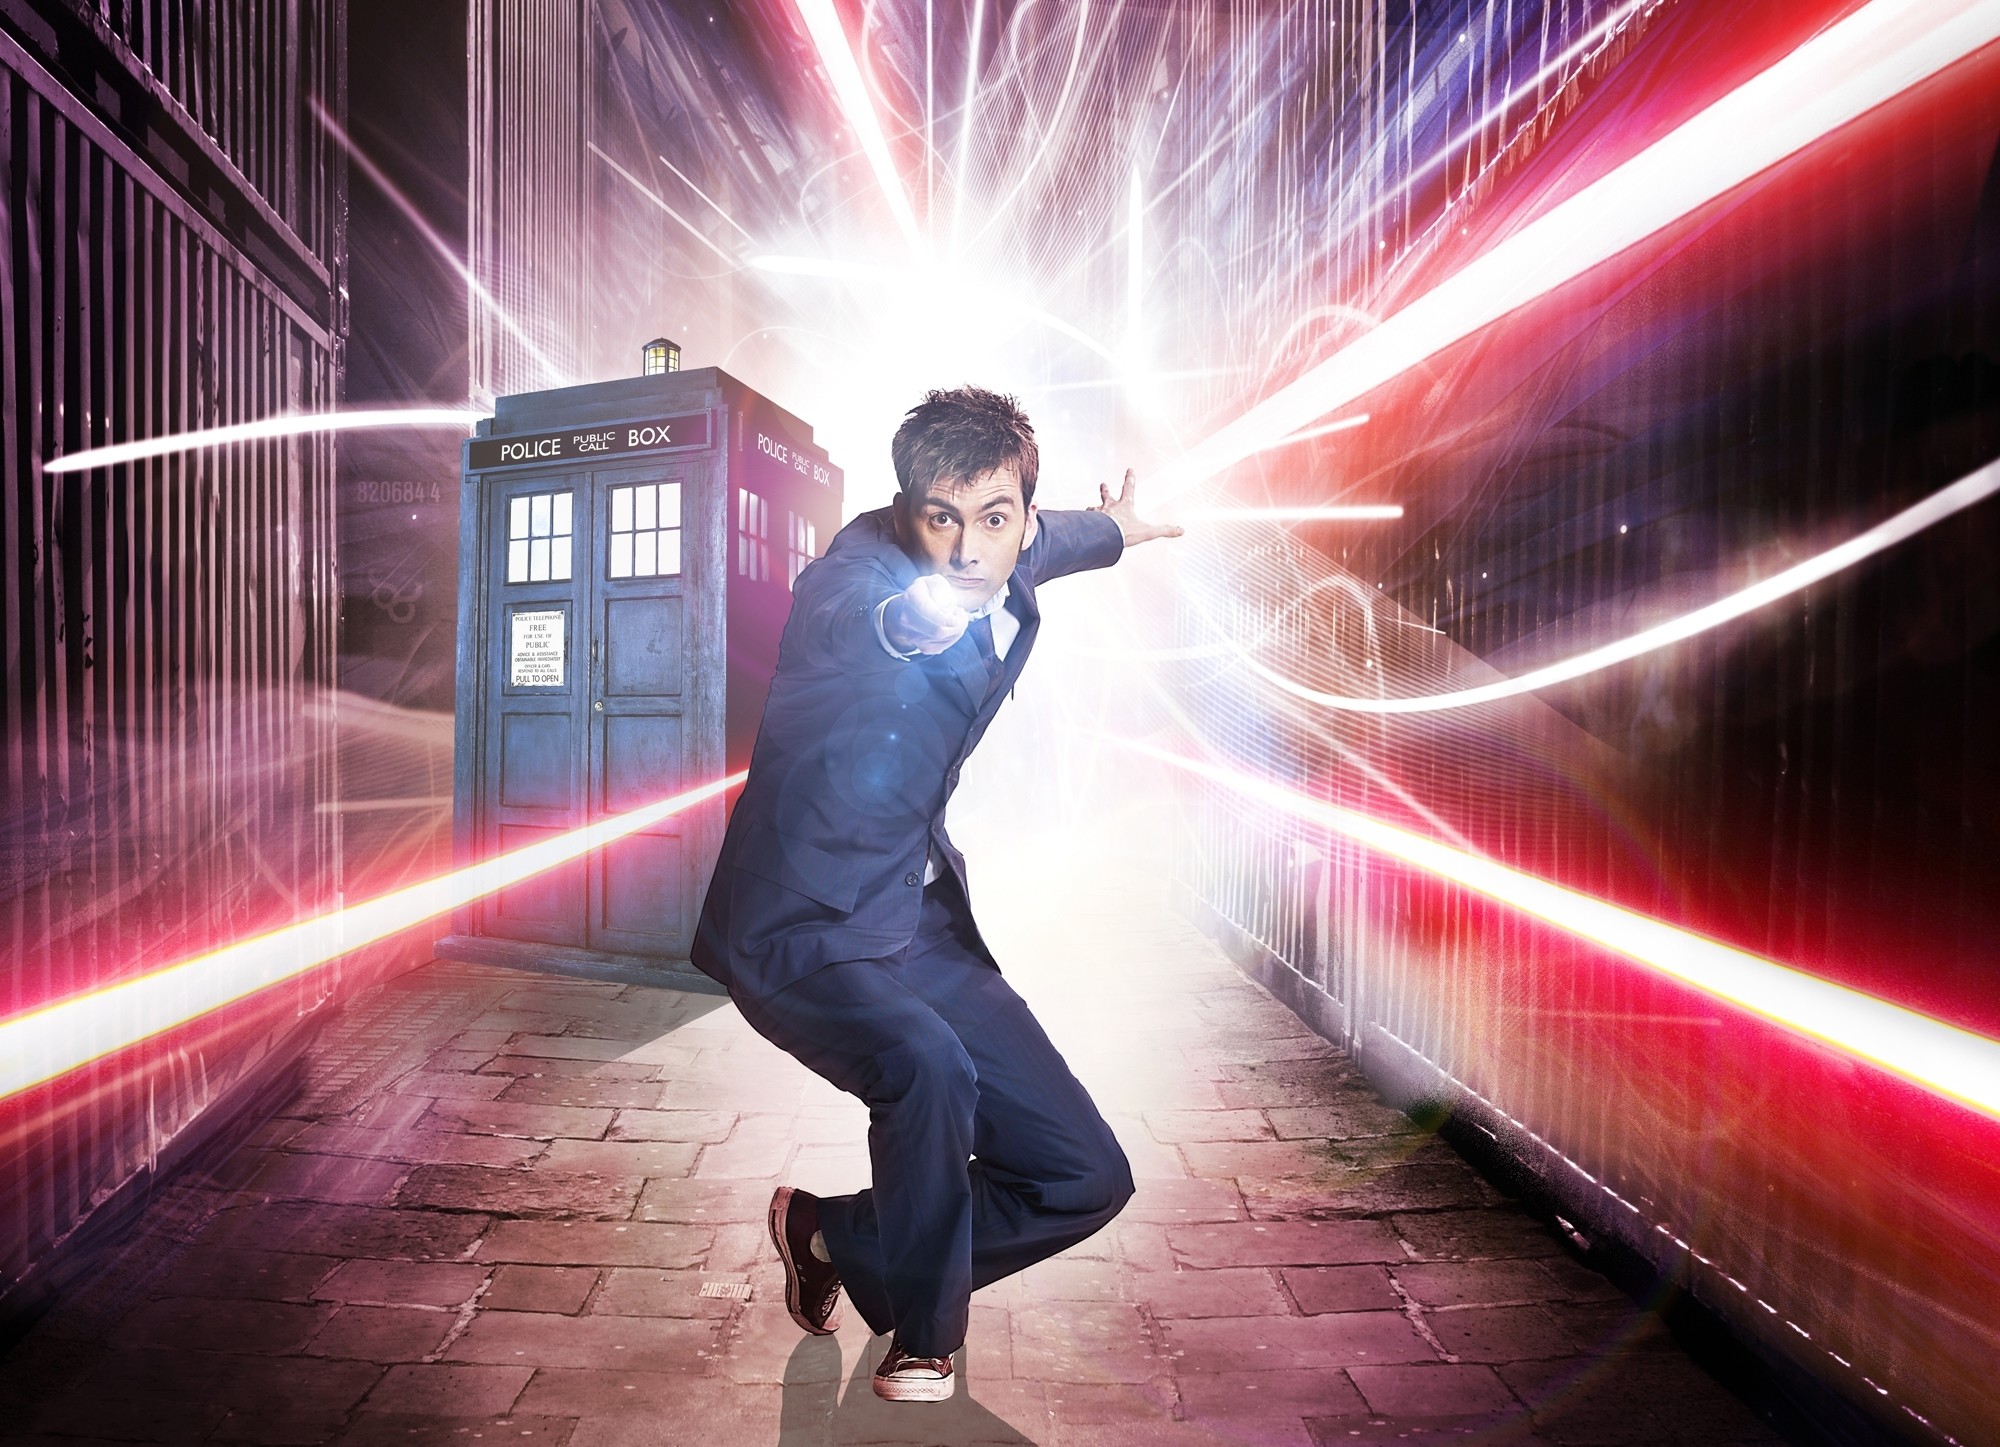 2000x1447 The Tenth Doctor images Season 4 Promotional Picture HD wallpaper and  background photos